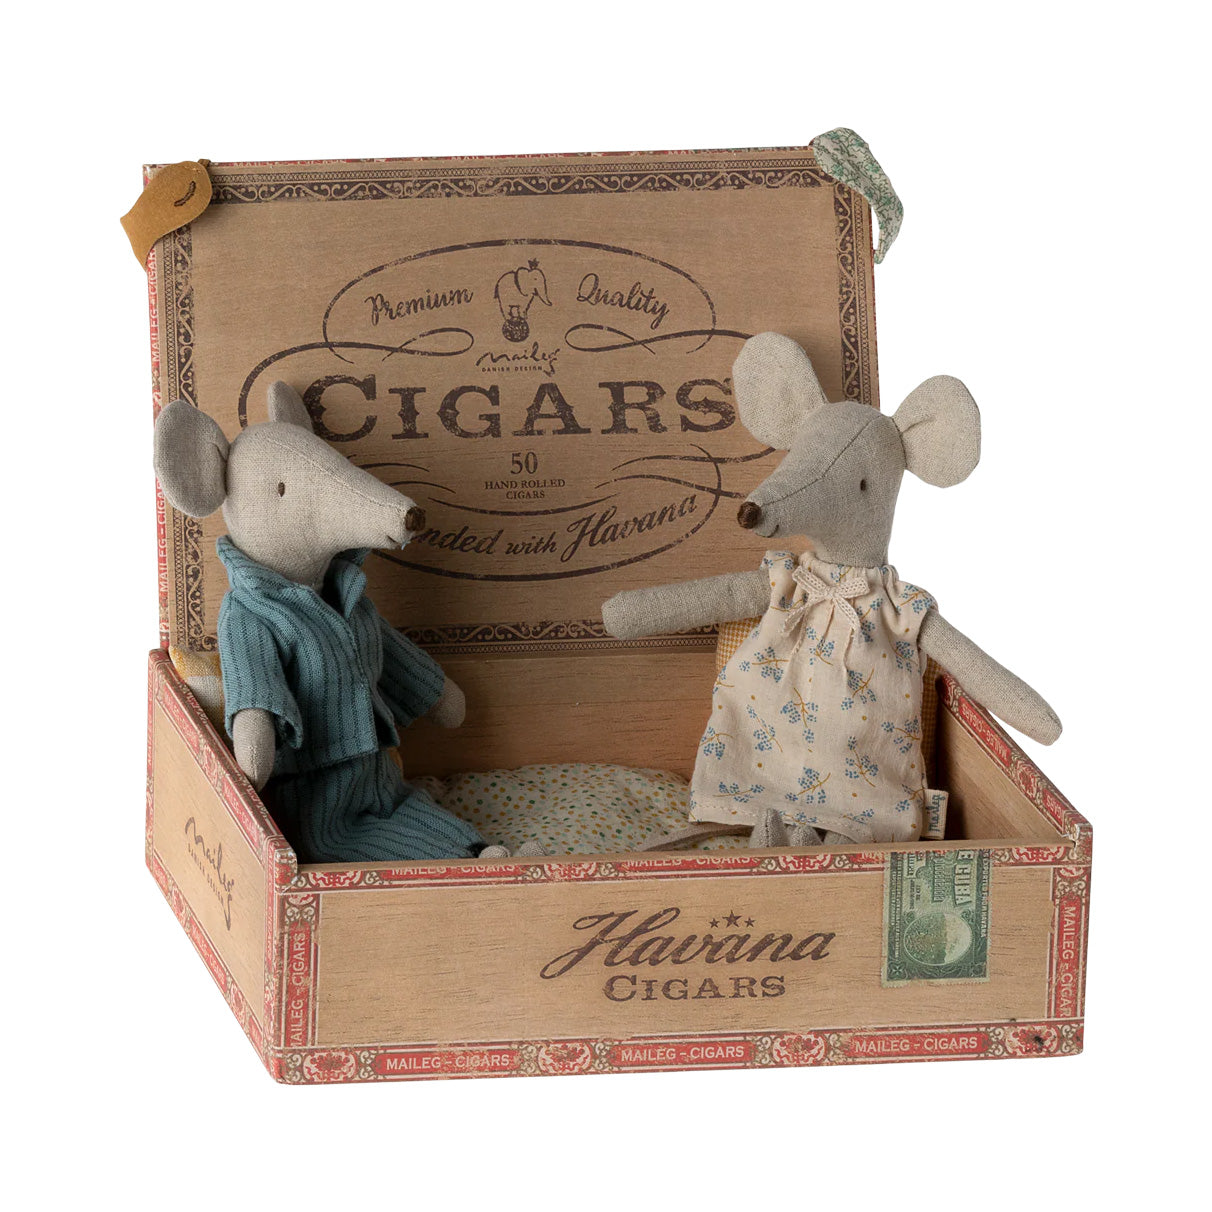 Mum and dad mice in cigarbox